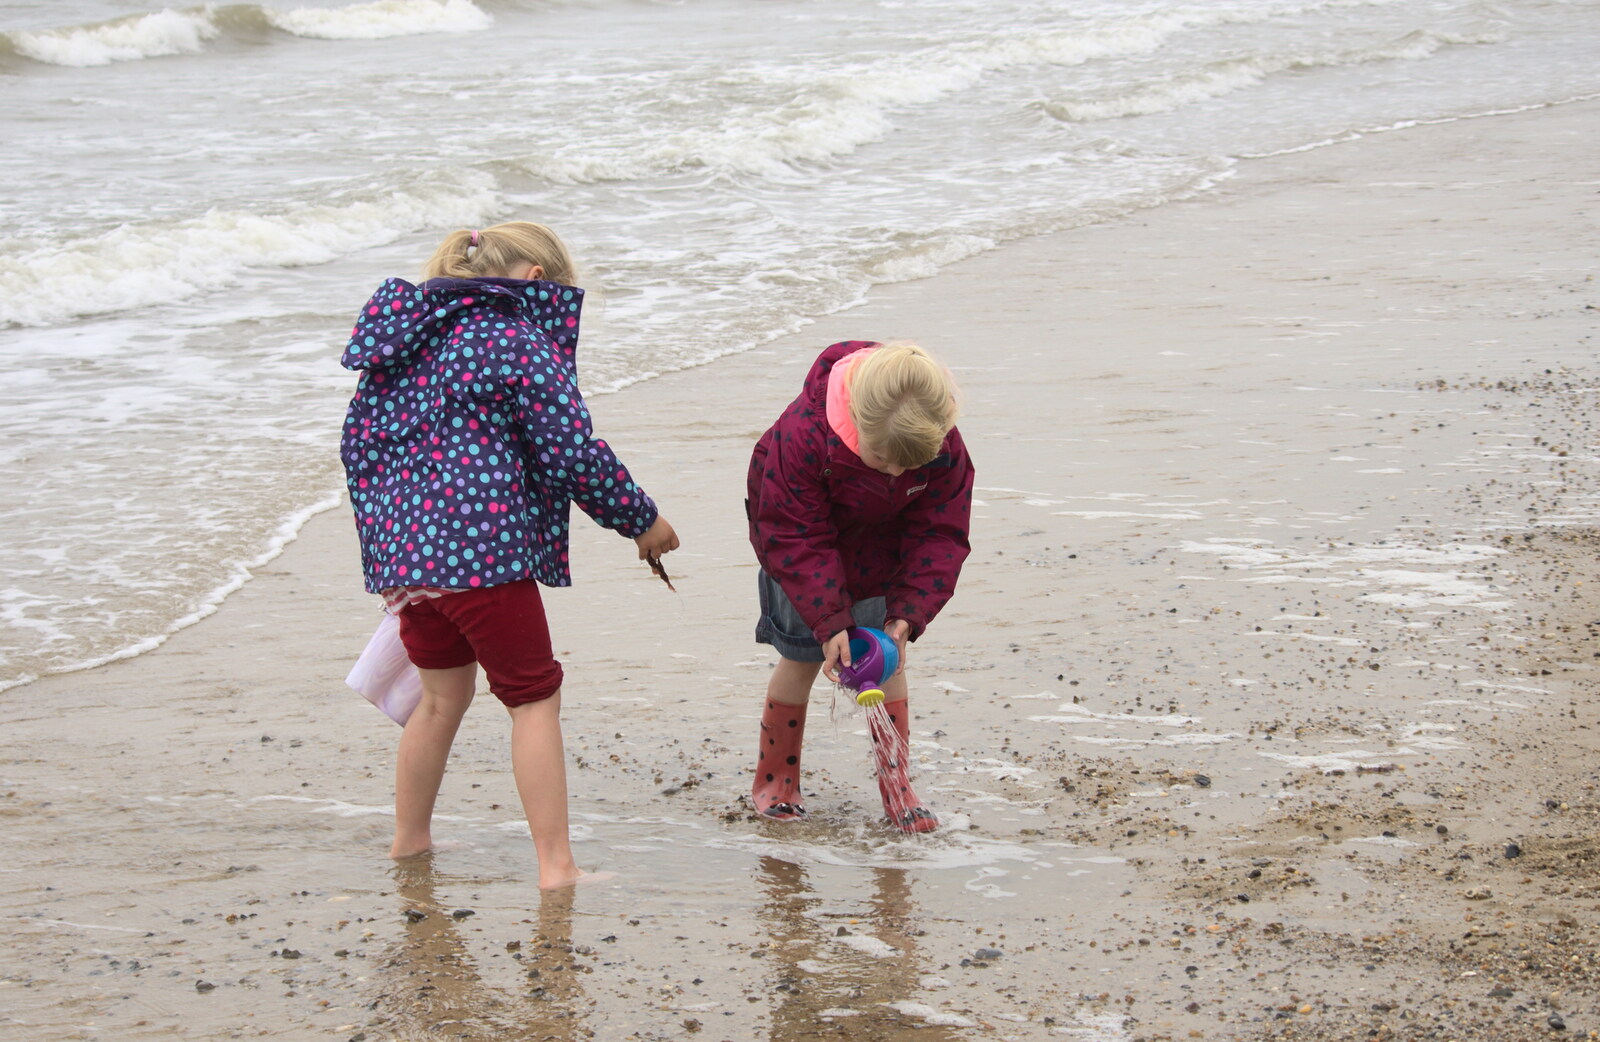 More messing in the sea from A Wet Weekend of Camping, Waxham Sands, Norfolk - 13th June 2015